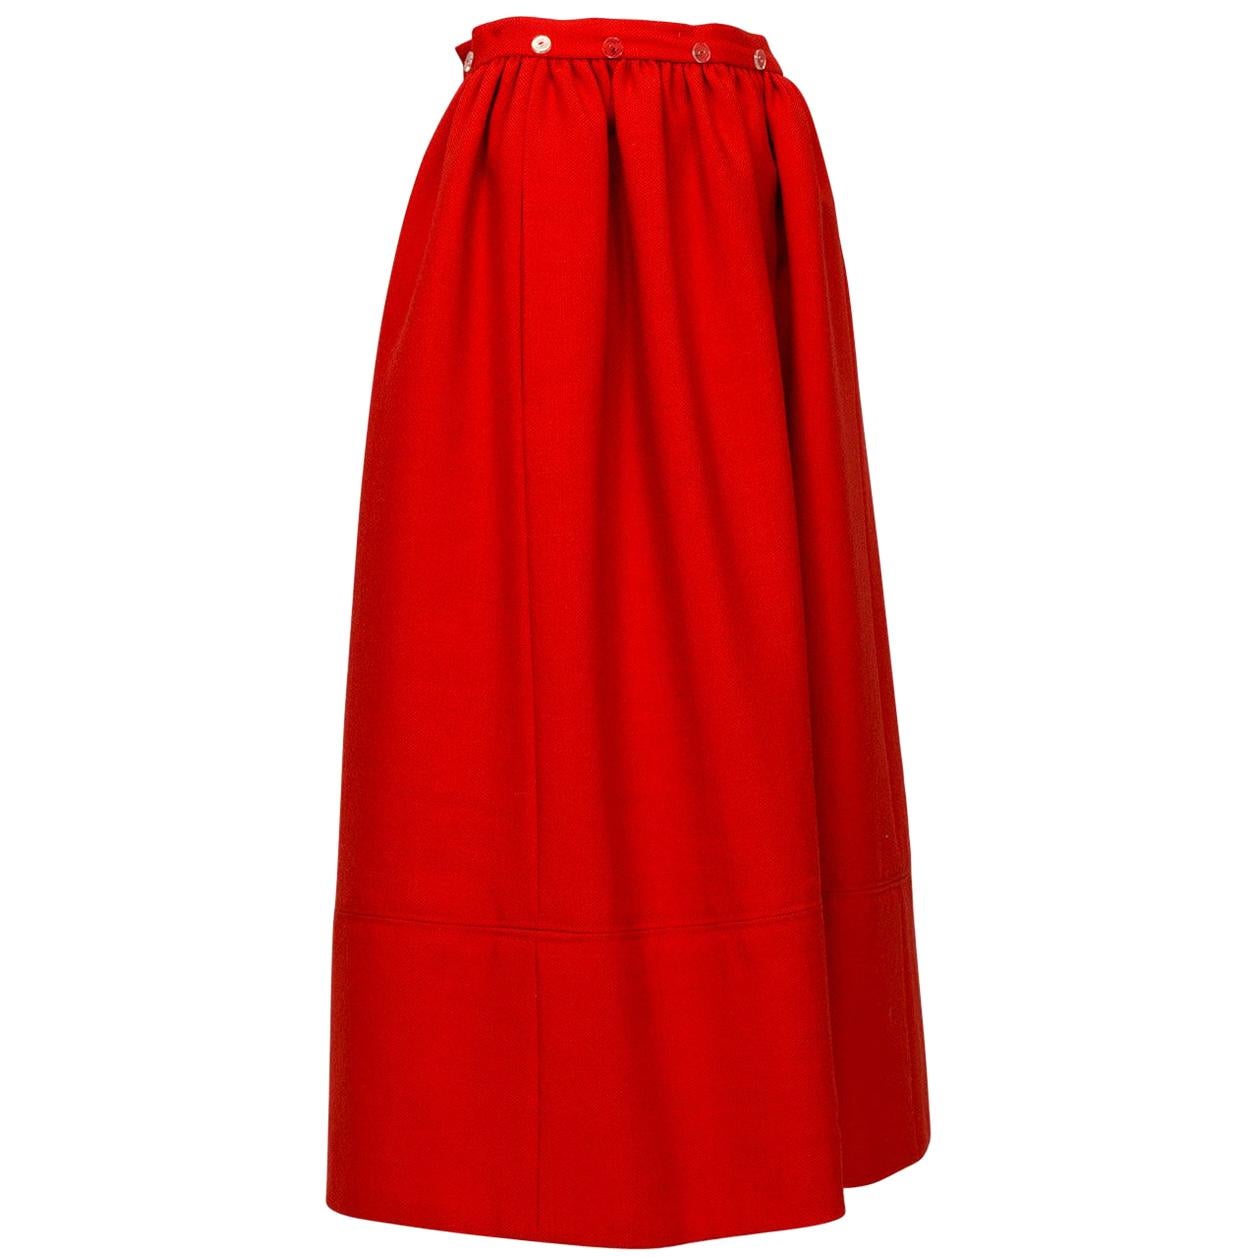 Norman Norell Heavyweight Red Gathered Hostess Skirt - Small, 1960s For Sale